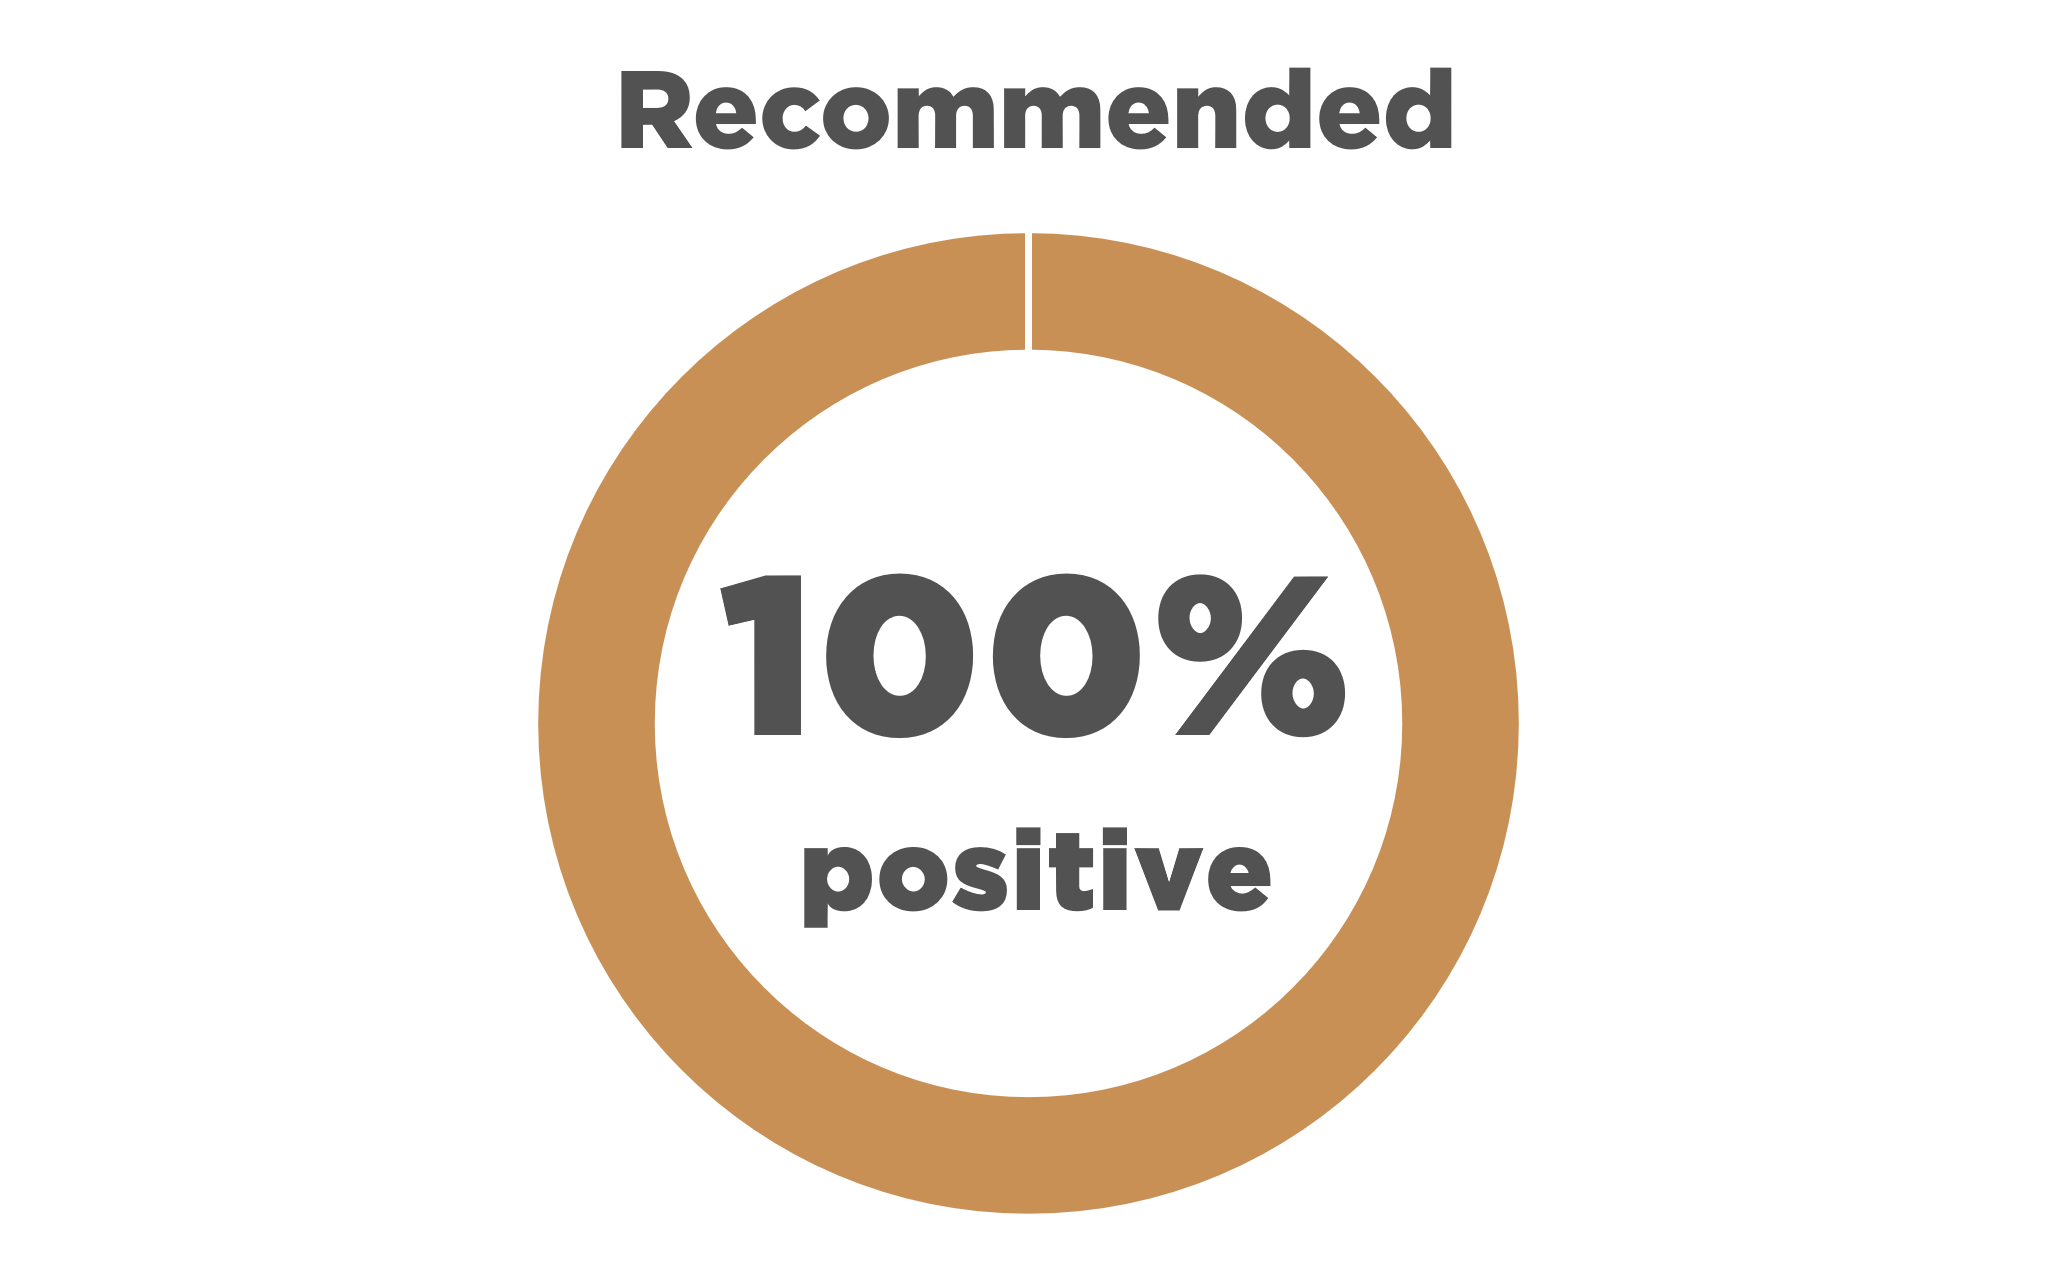 Text reads: "Recommended 100% positive" with a pie chart representing the statement